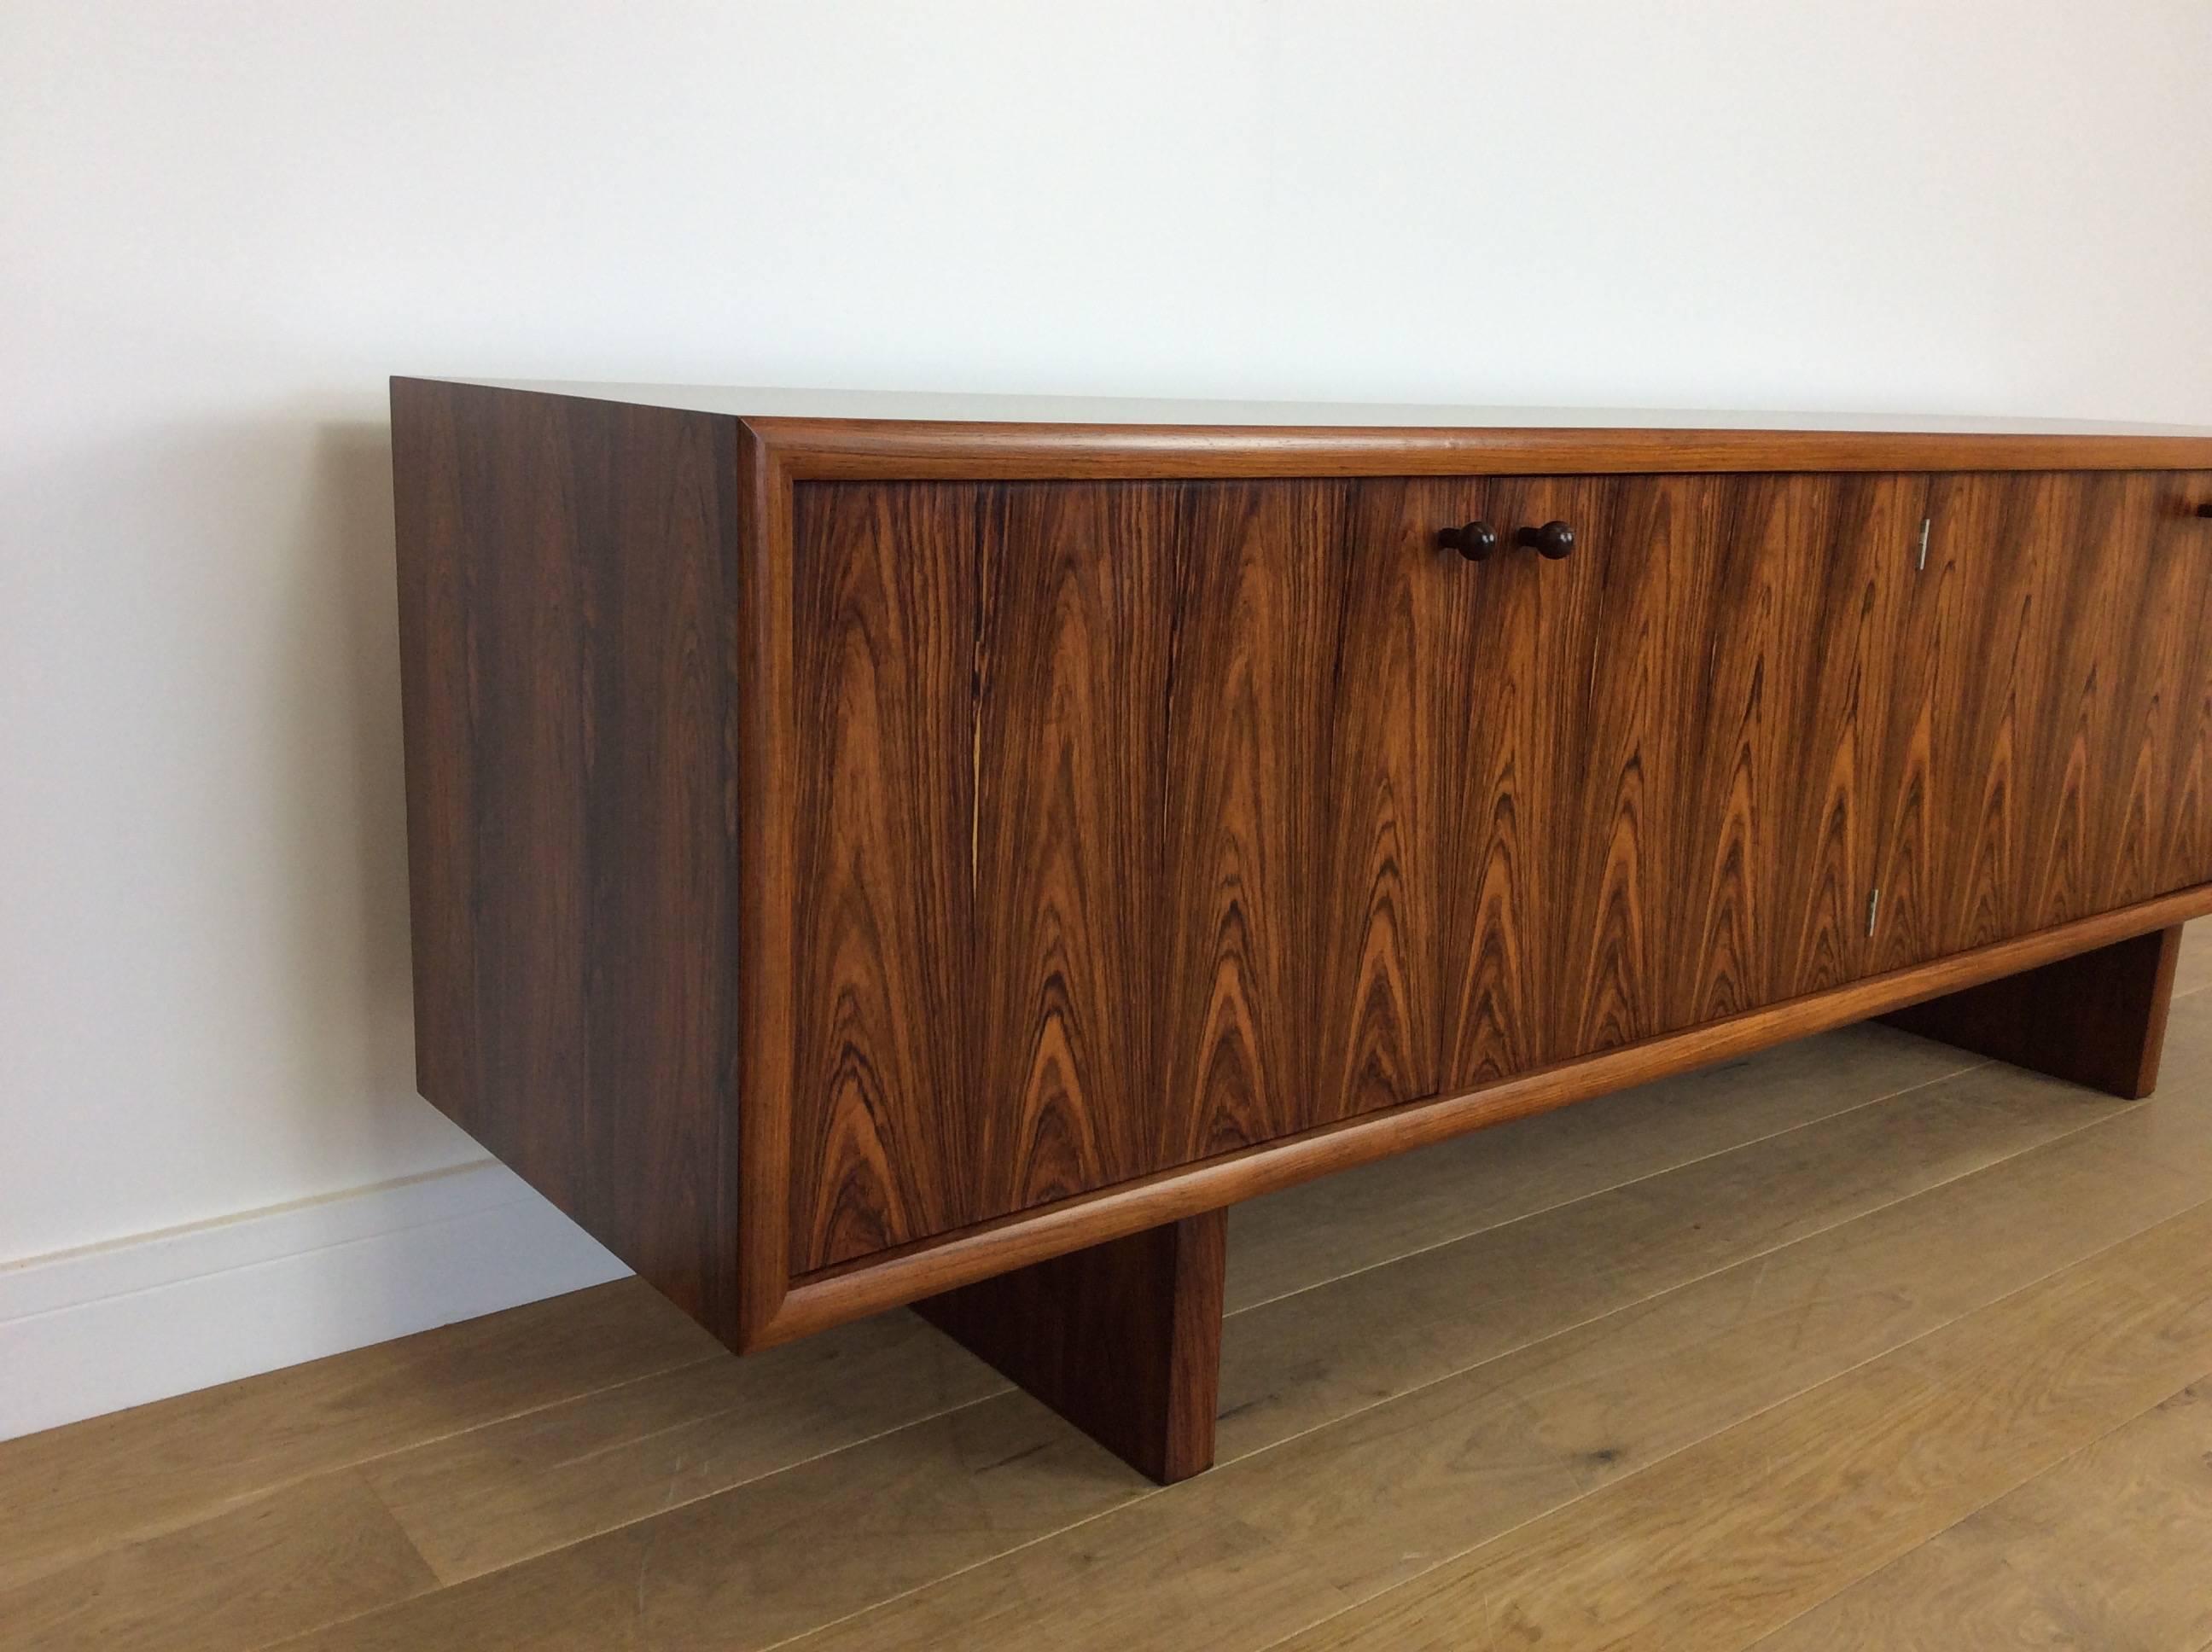 20th Century Midcentury Rosewood Sideboards Credenza Designed by Martin Hall